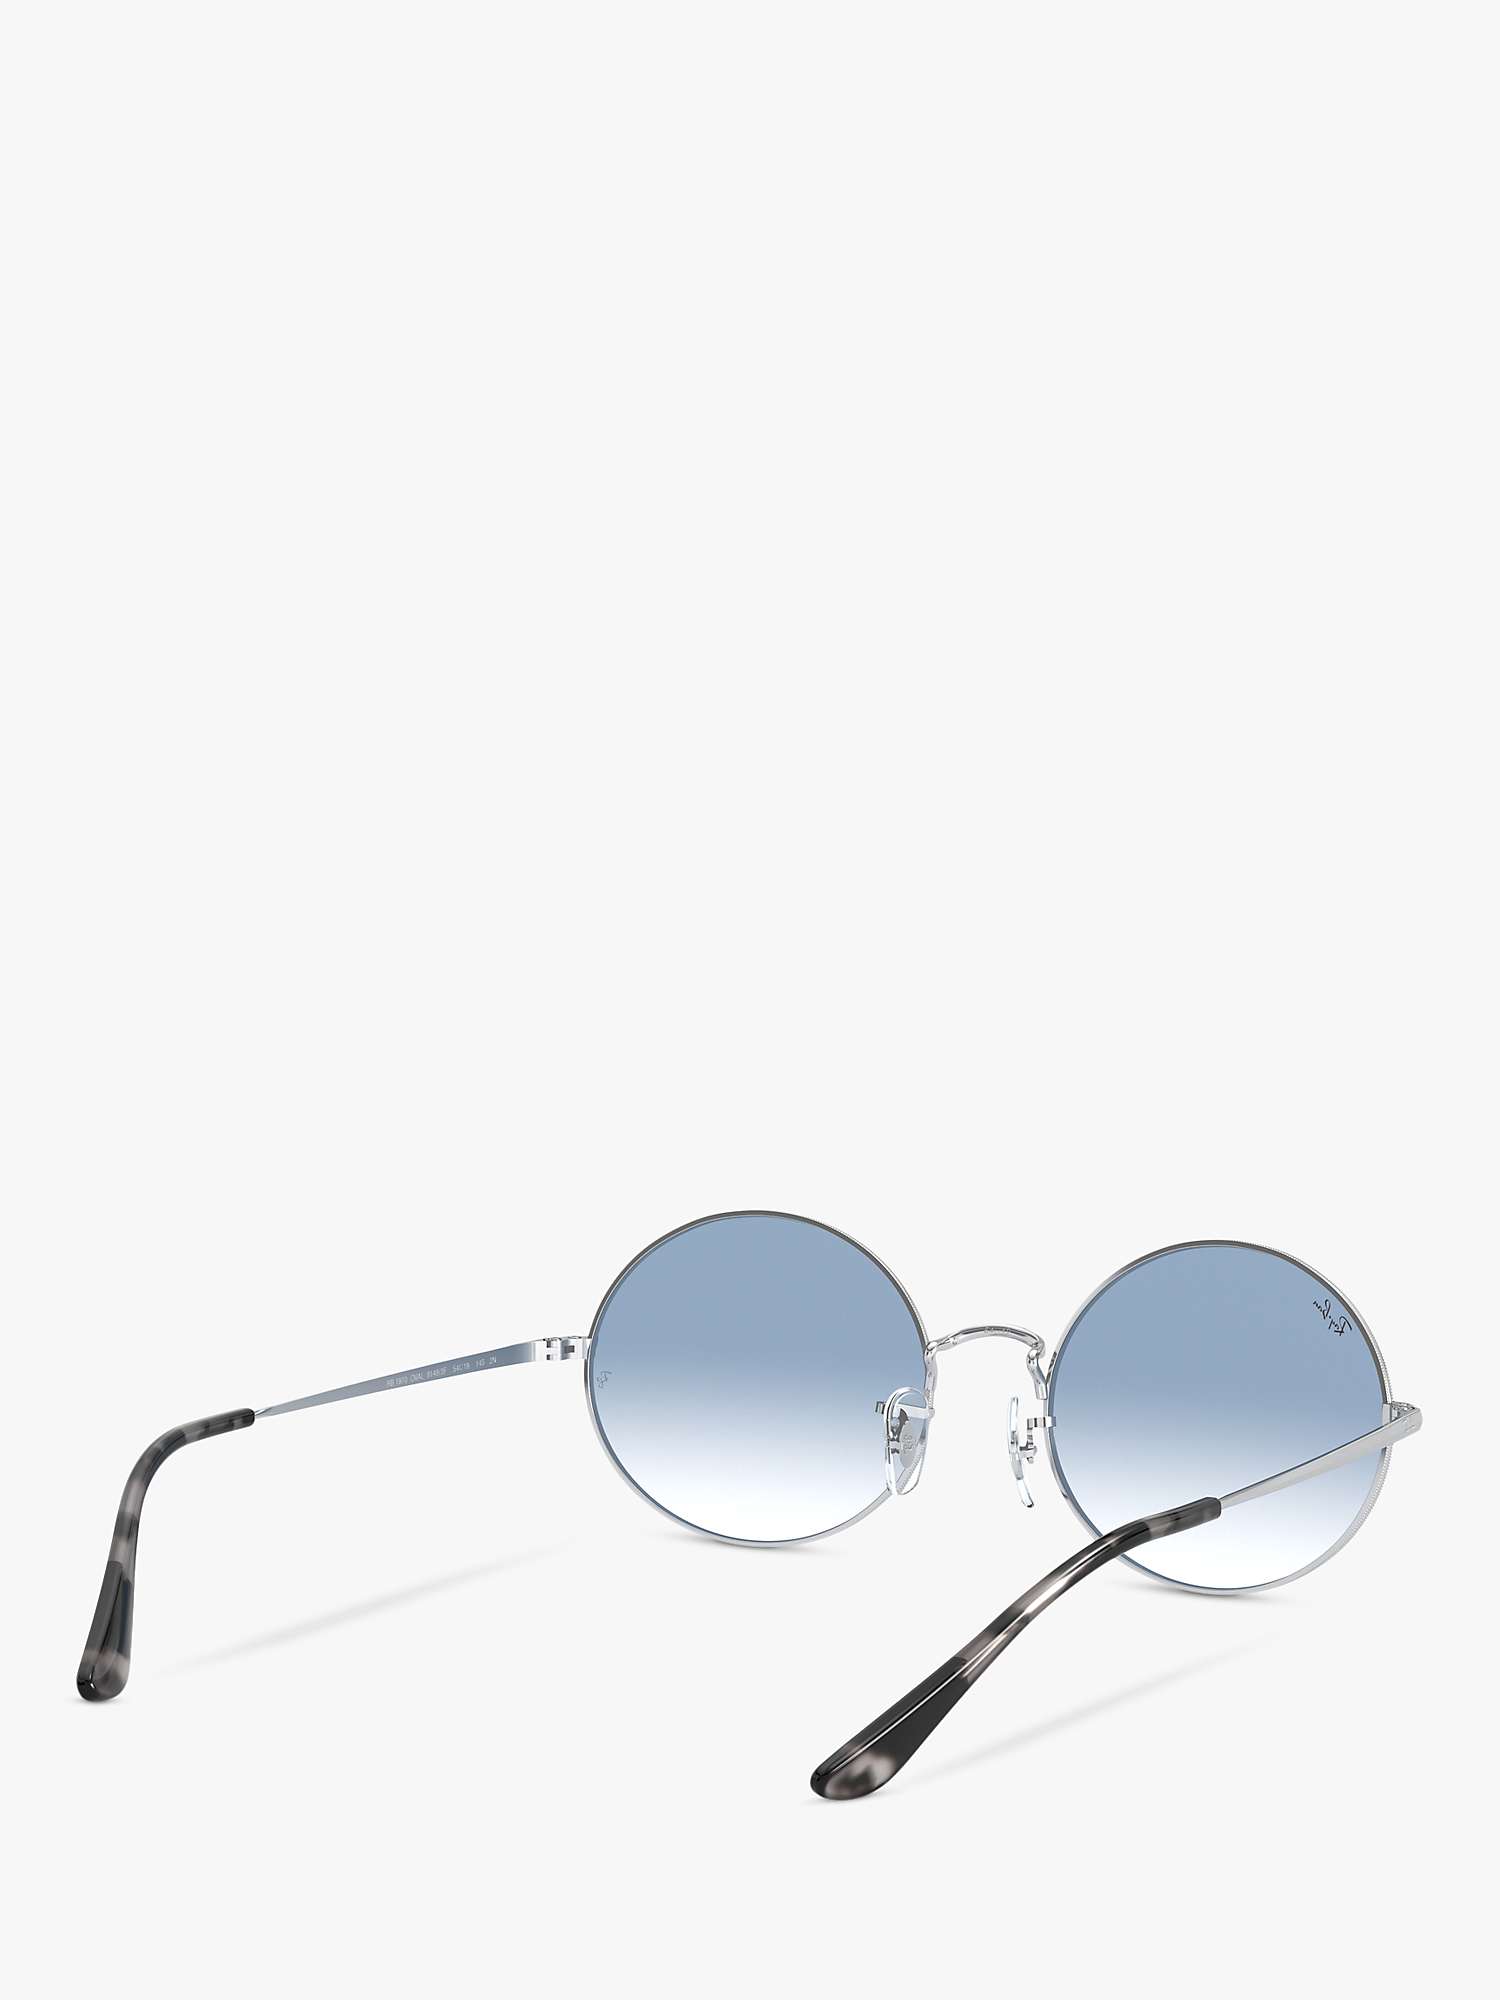 Buy Ray-Ban RB1970 Unisex Oval Sunglasses, Silver/Light Blue Gradient Online at johnlewis.com